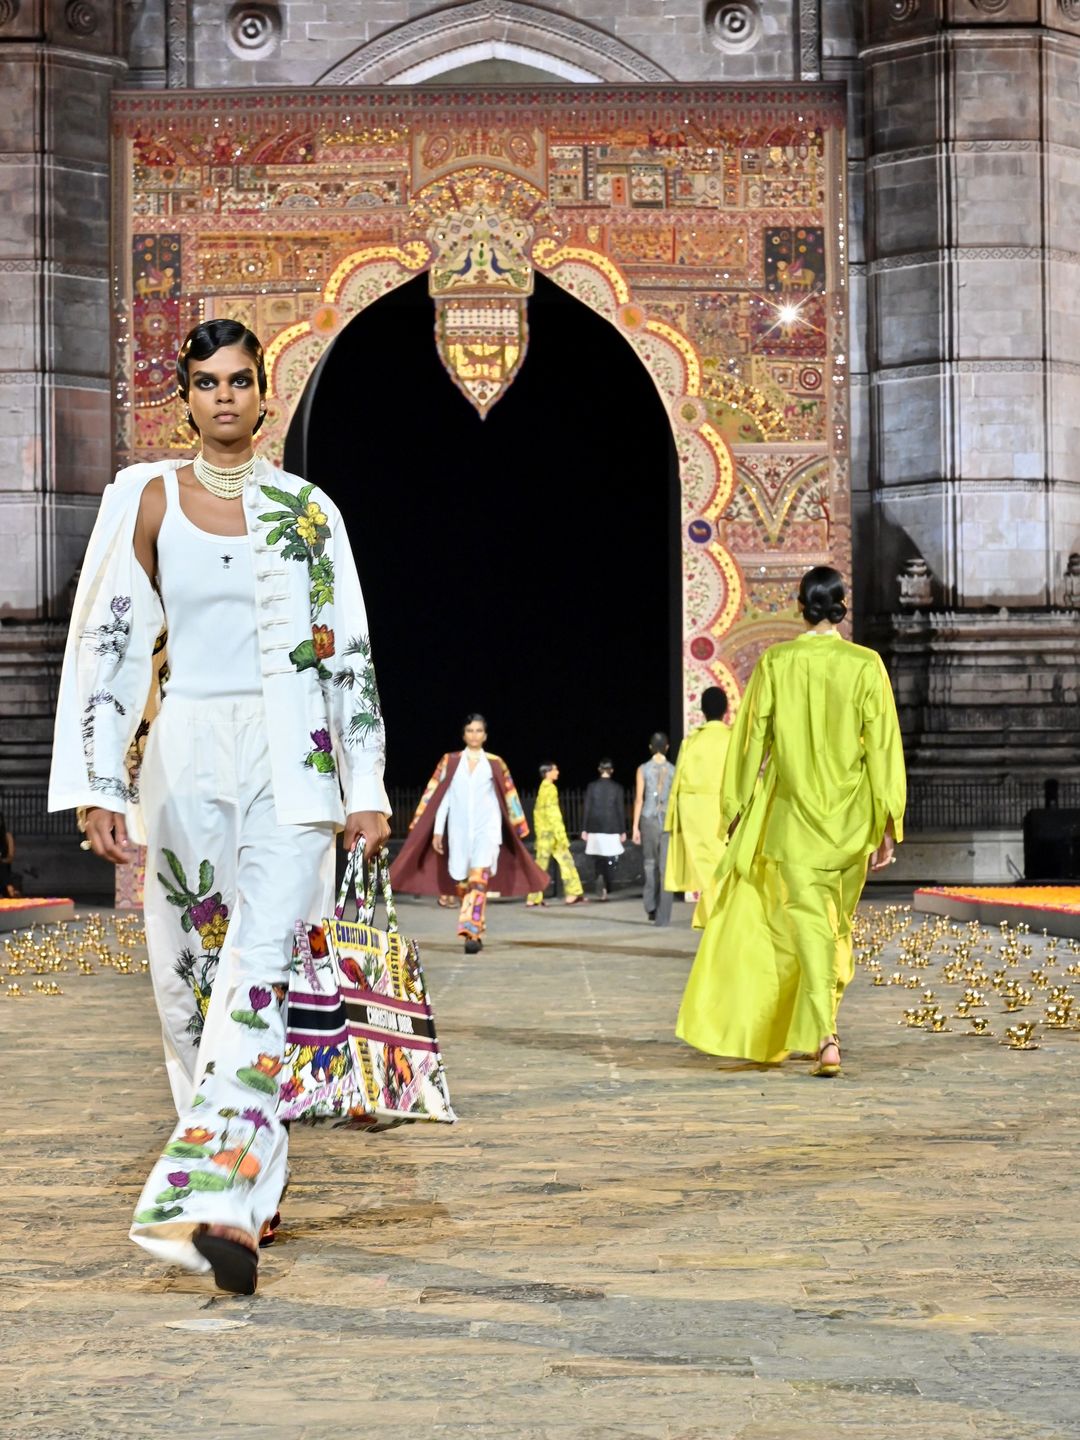 MUMBAI, INDIA - MARCH 30: A model walks the runway during the Dior Fall 2023 show at the Gateway of India monument on March 30, 2023 in Mumbai, India. (Photo by Rubina A. Khan/Getty Images)